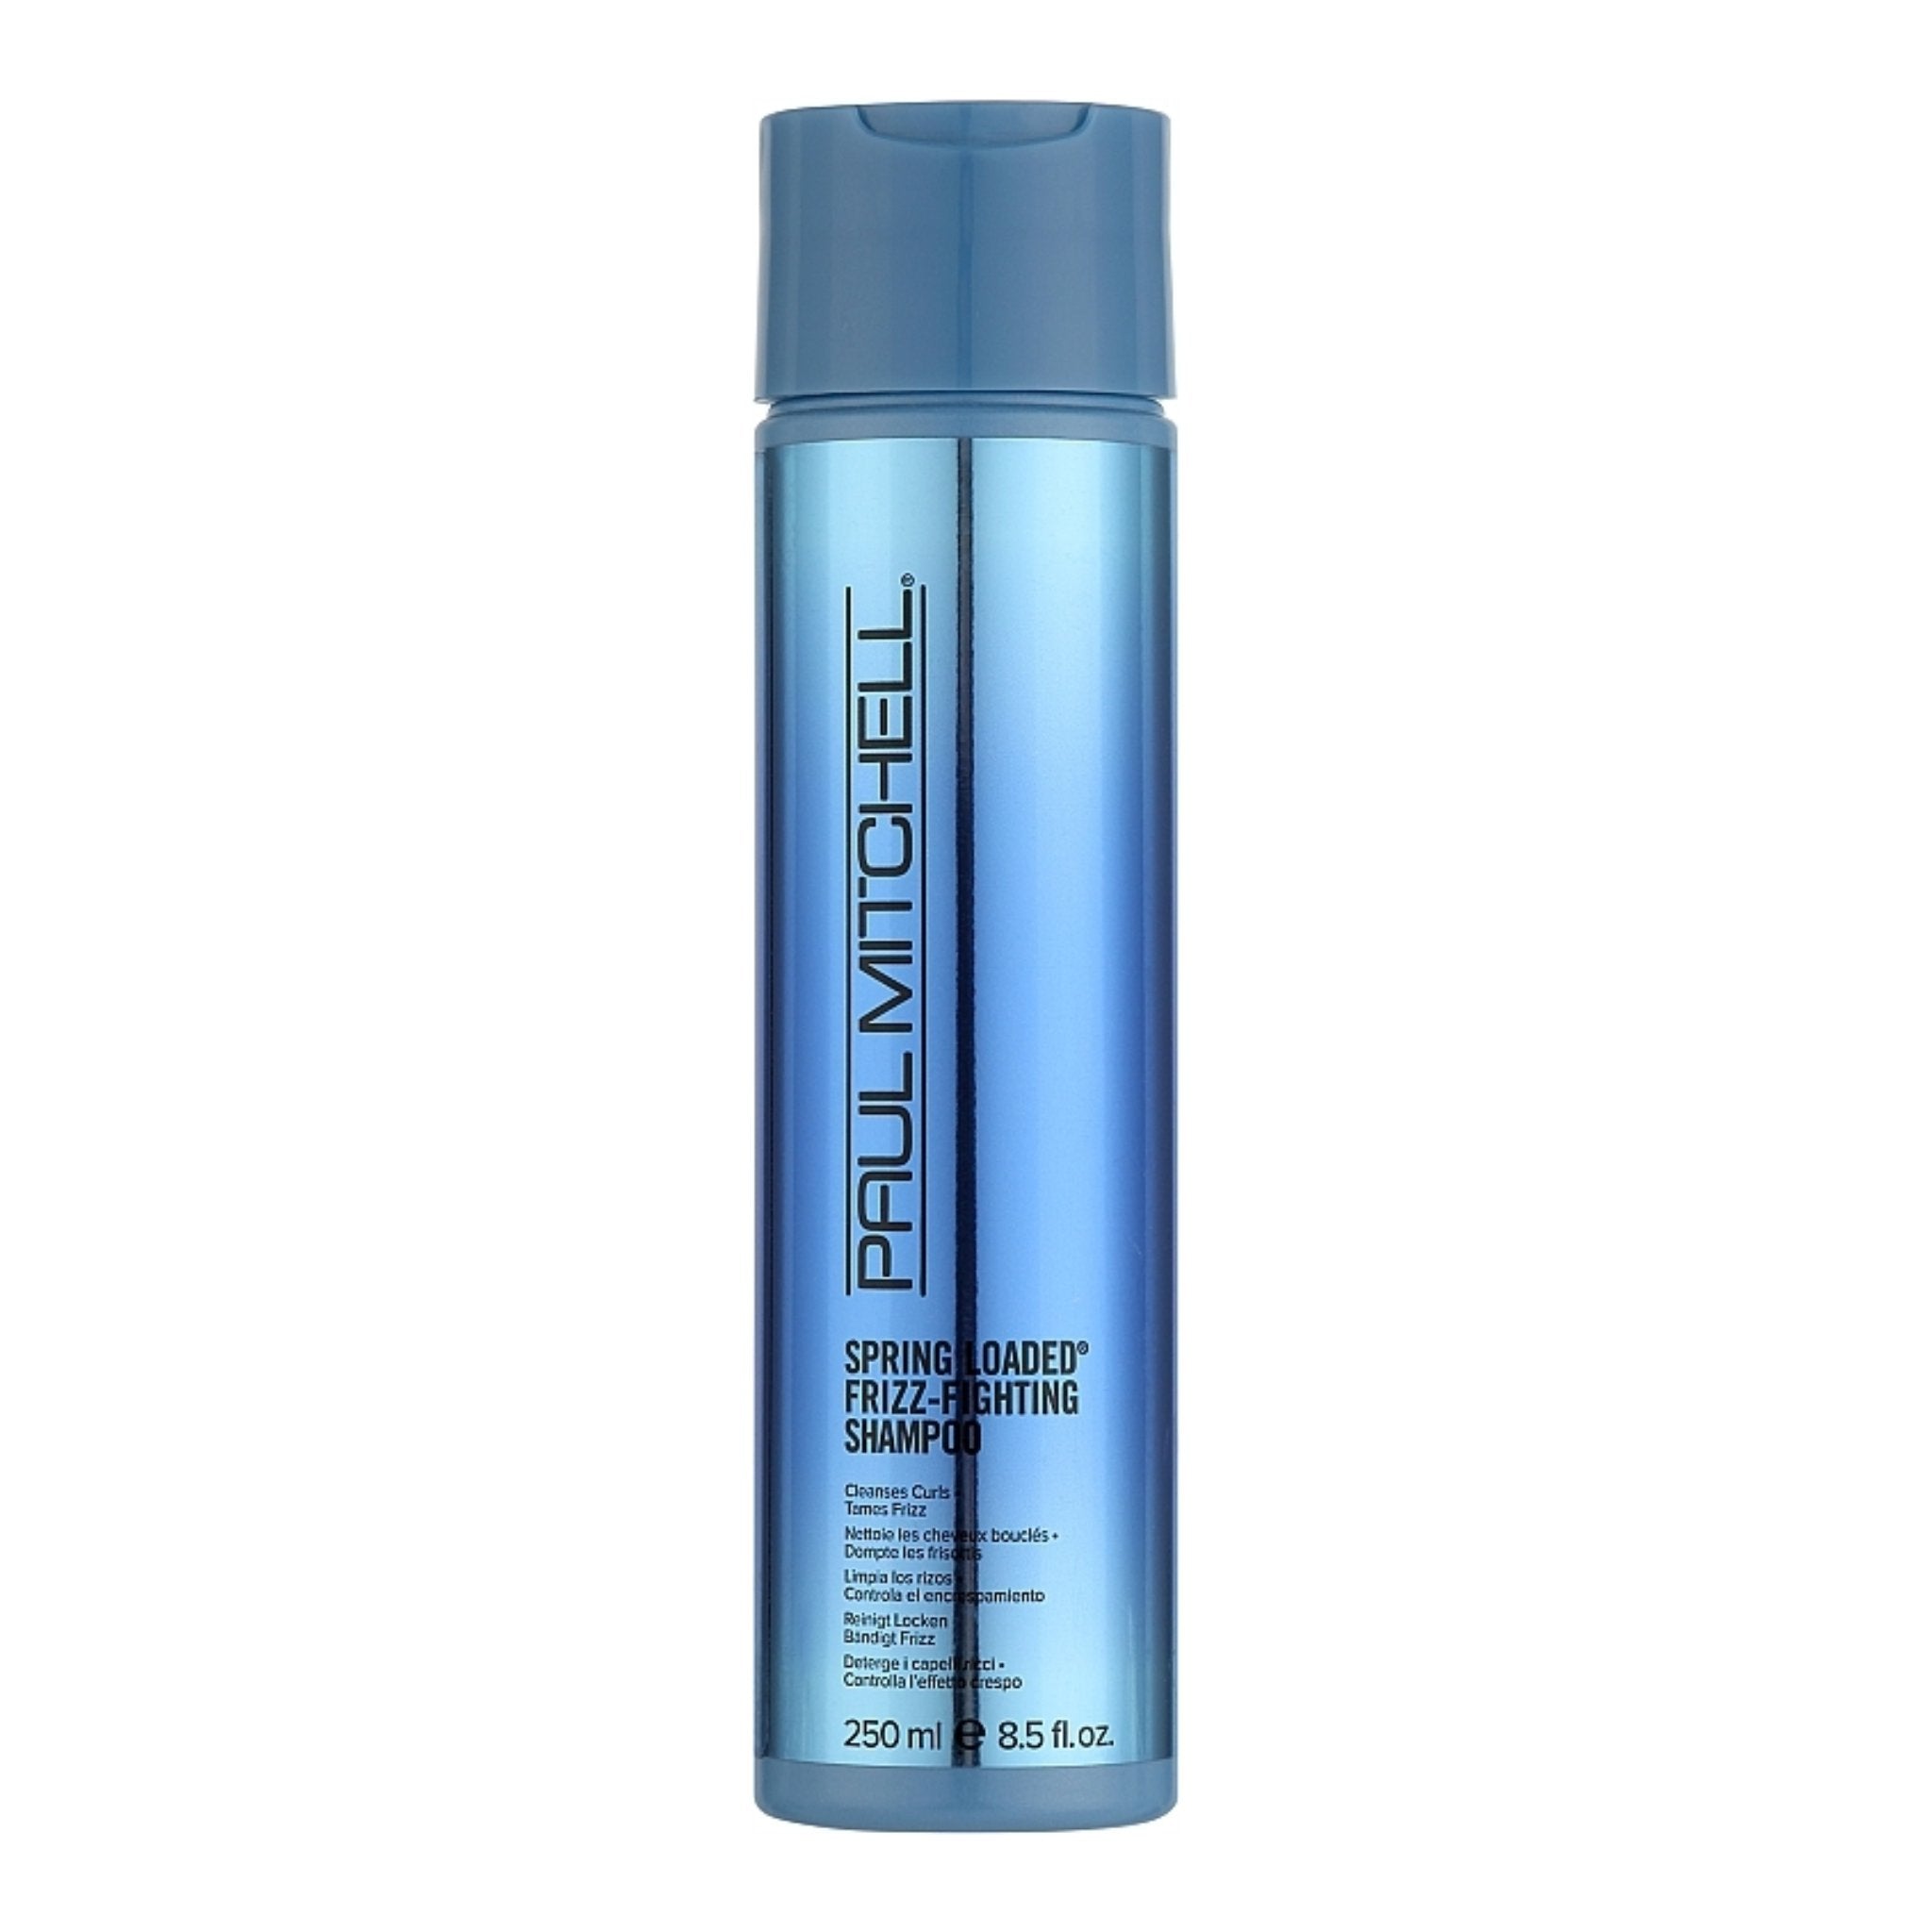 Paul Mitchell. Shampoing Spring Loaded Frizz Fighting - 250 ml - Concept C. Shop